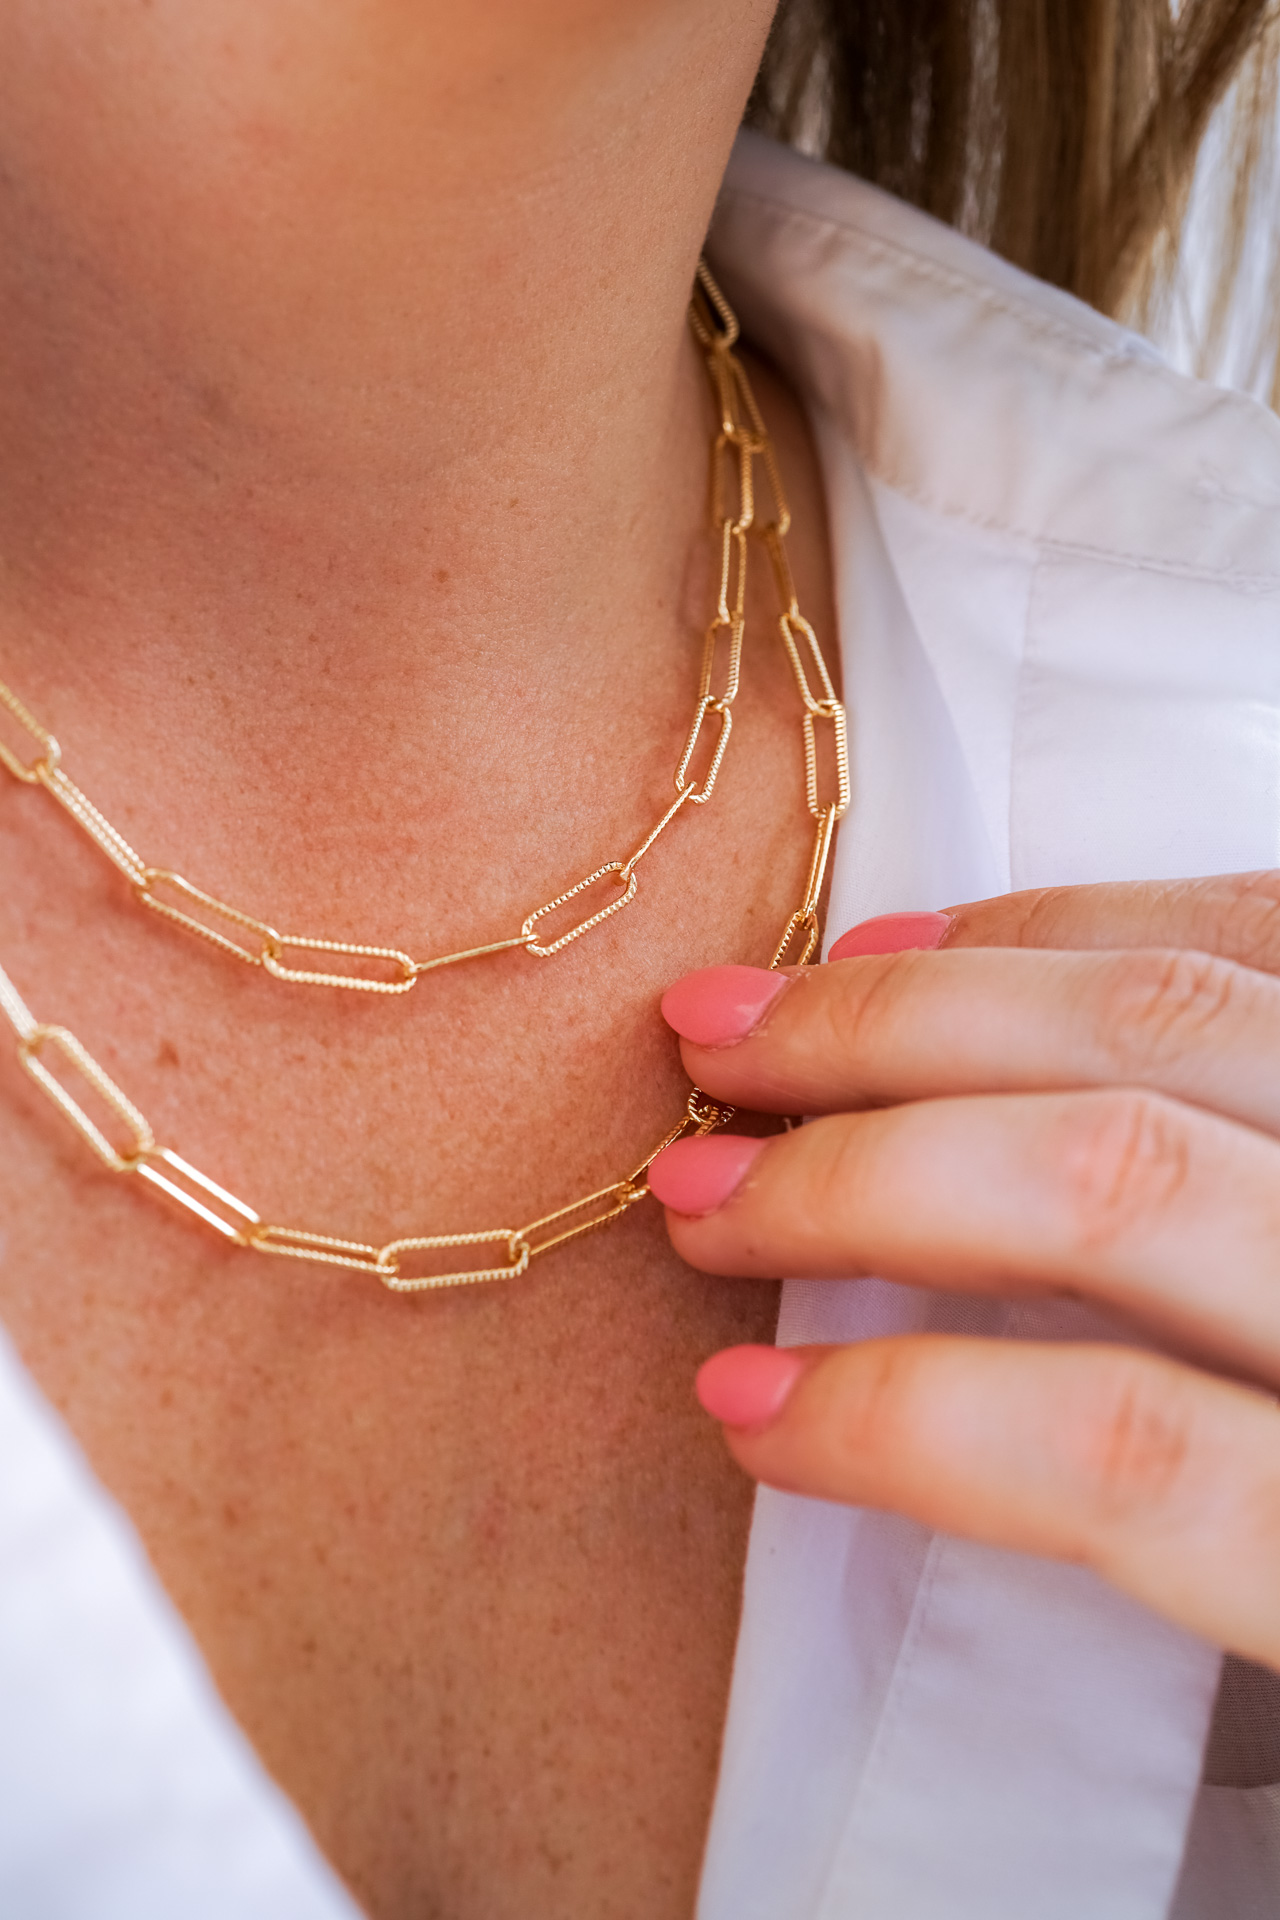 The Necklace Clasp Hack You Can Do With A Paper Clip